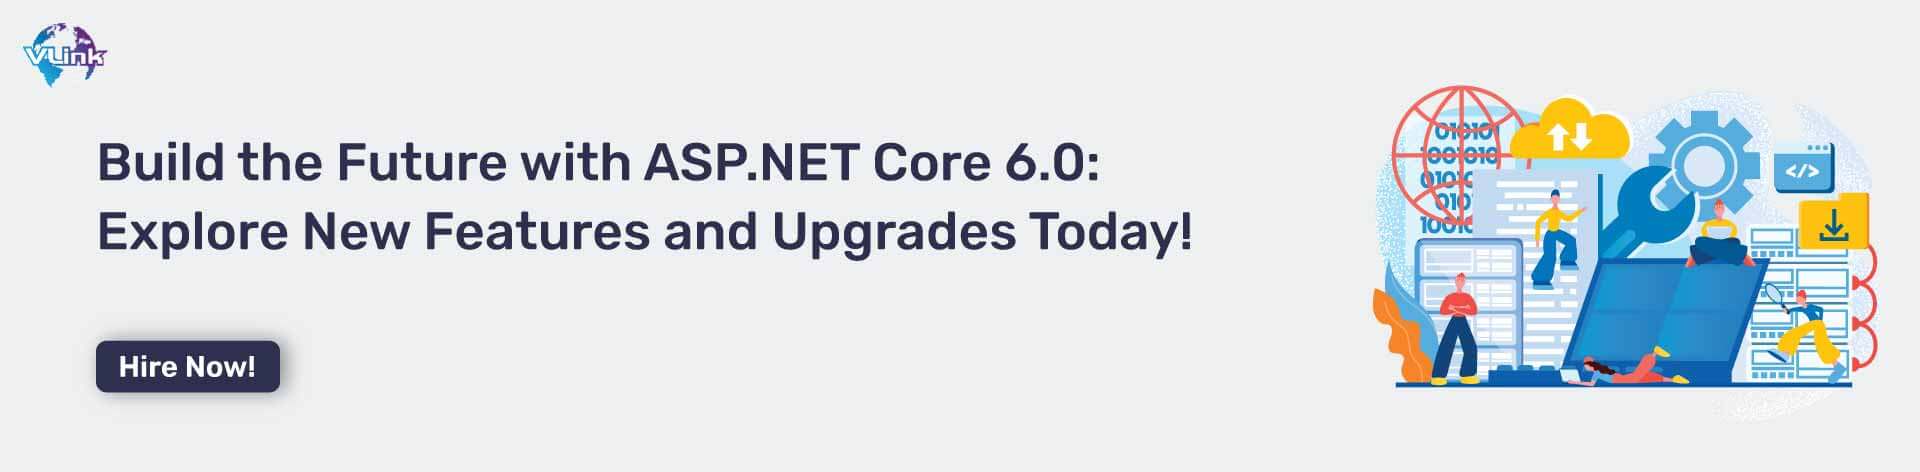 aspnet-core-60-new-features-and-upgrades-cta1